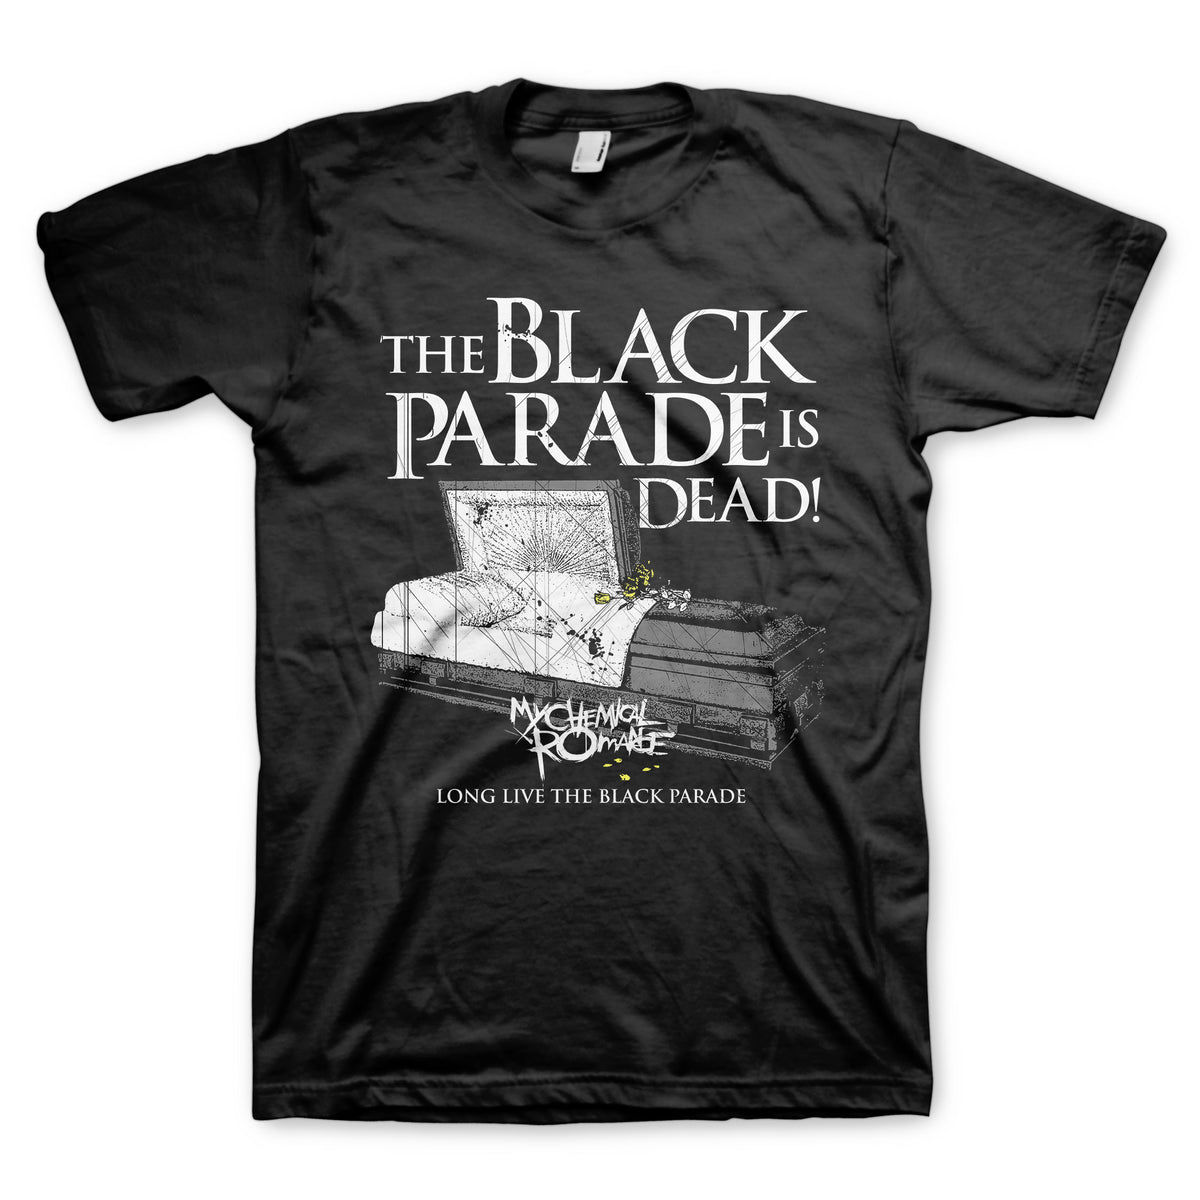 My Chemical Romance Black Parade is Dead T-Shirt